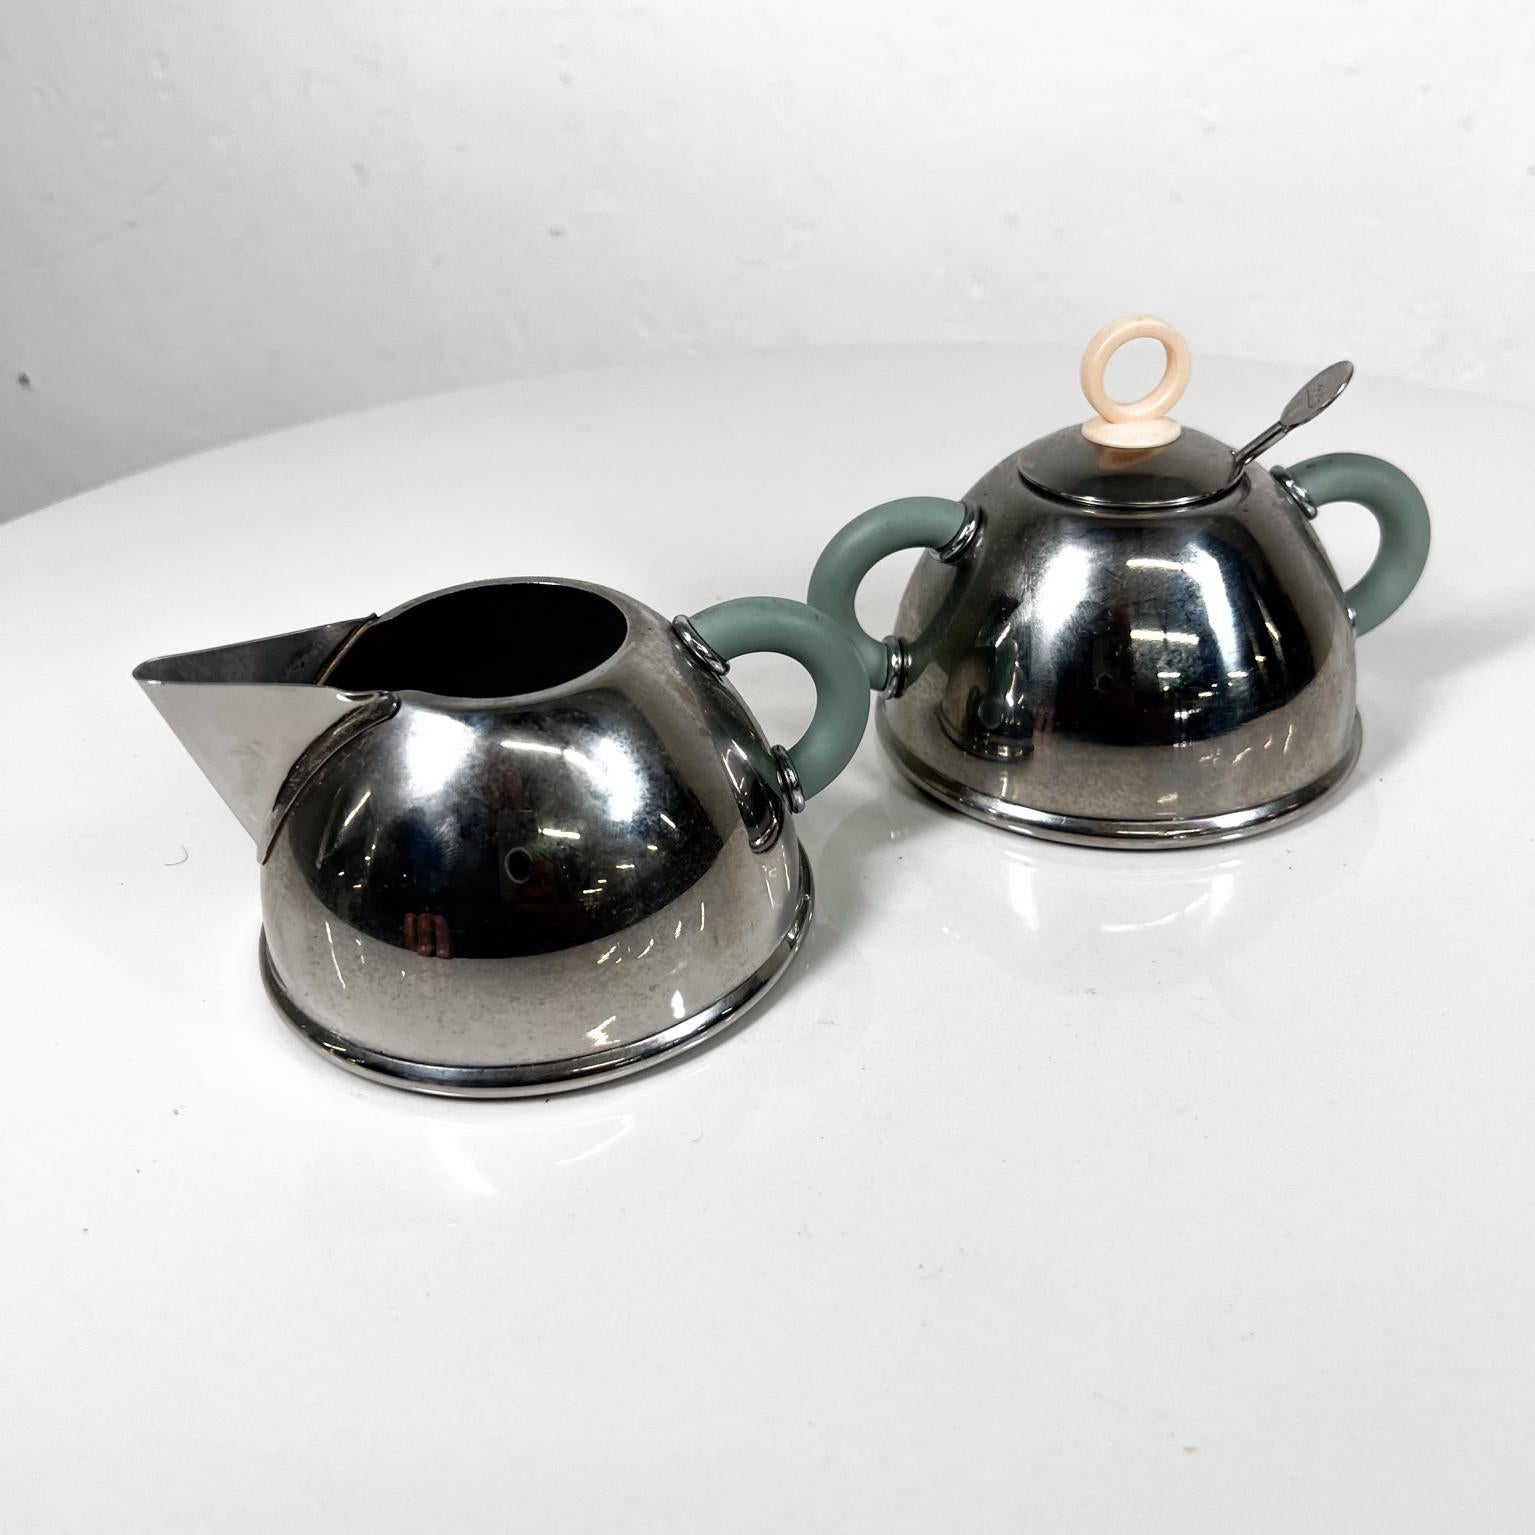 Taiwanese 1985 Iconic Alessi Sugar Bowl + Creamer designed by Michael Graves For Sale